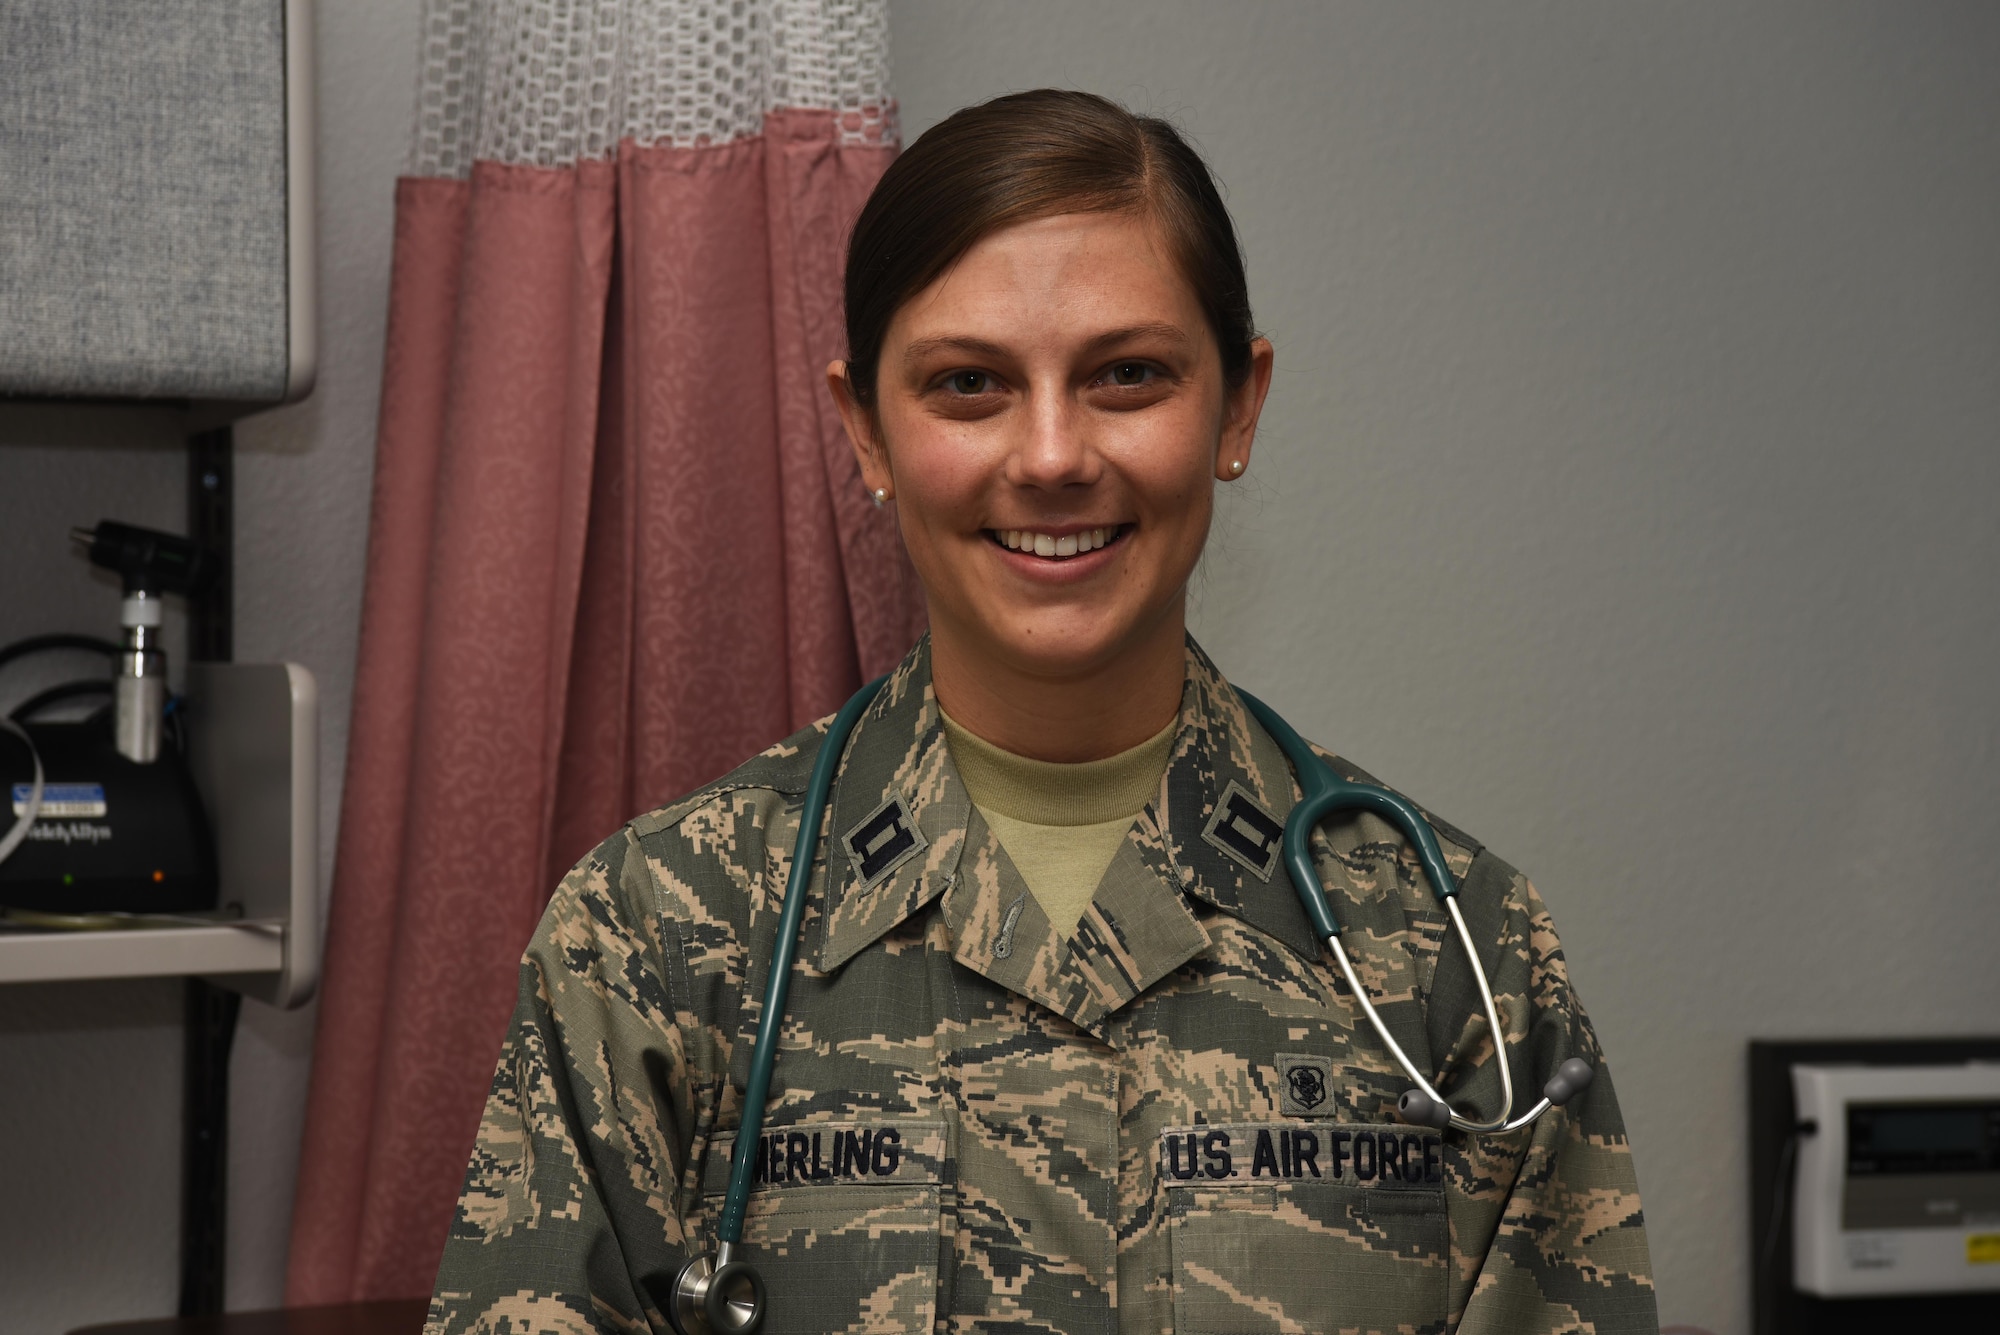 Capt. Kelly Smerling, 90th Medical Operations Squadron pediatric nurse practitioner, poses at the clinic at F.E. Warren Air Force Base, Wyo., Sept. 29, 2016. The 90th MOS mission is to provide quality and safe healthcare to active duty, dependent and veteran patients. (U.S. Air Force photo by Airman 1st Class Breanna Carter)